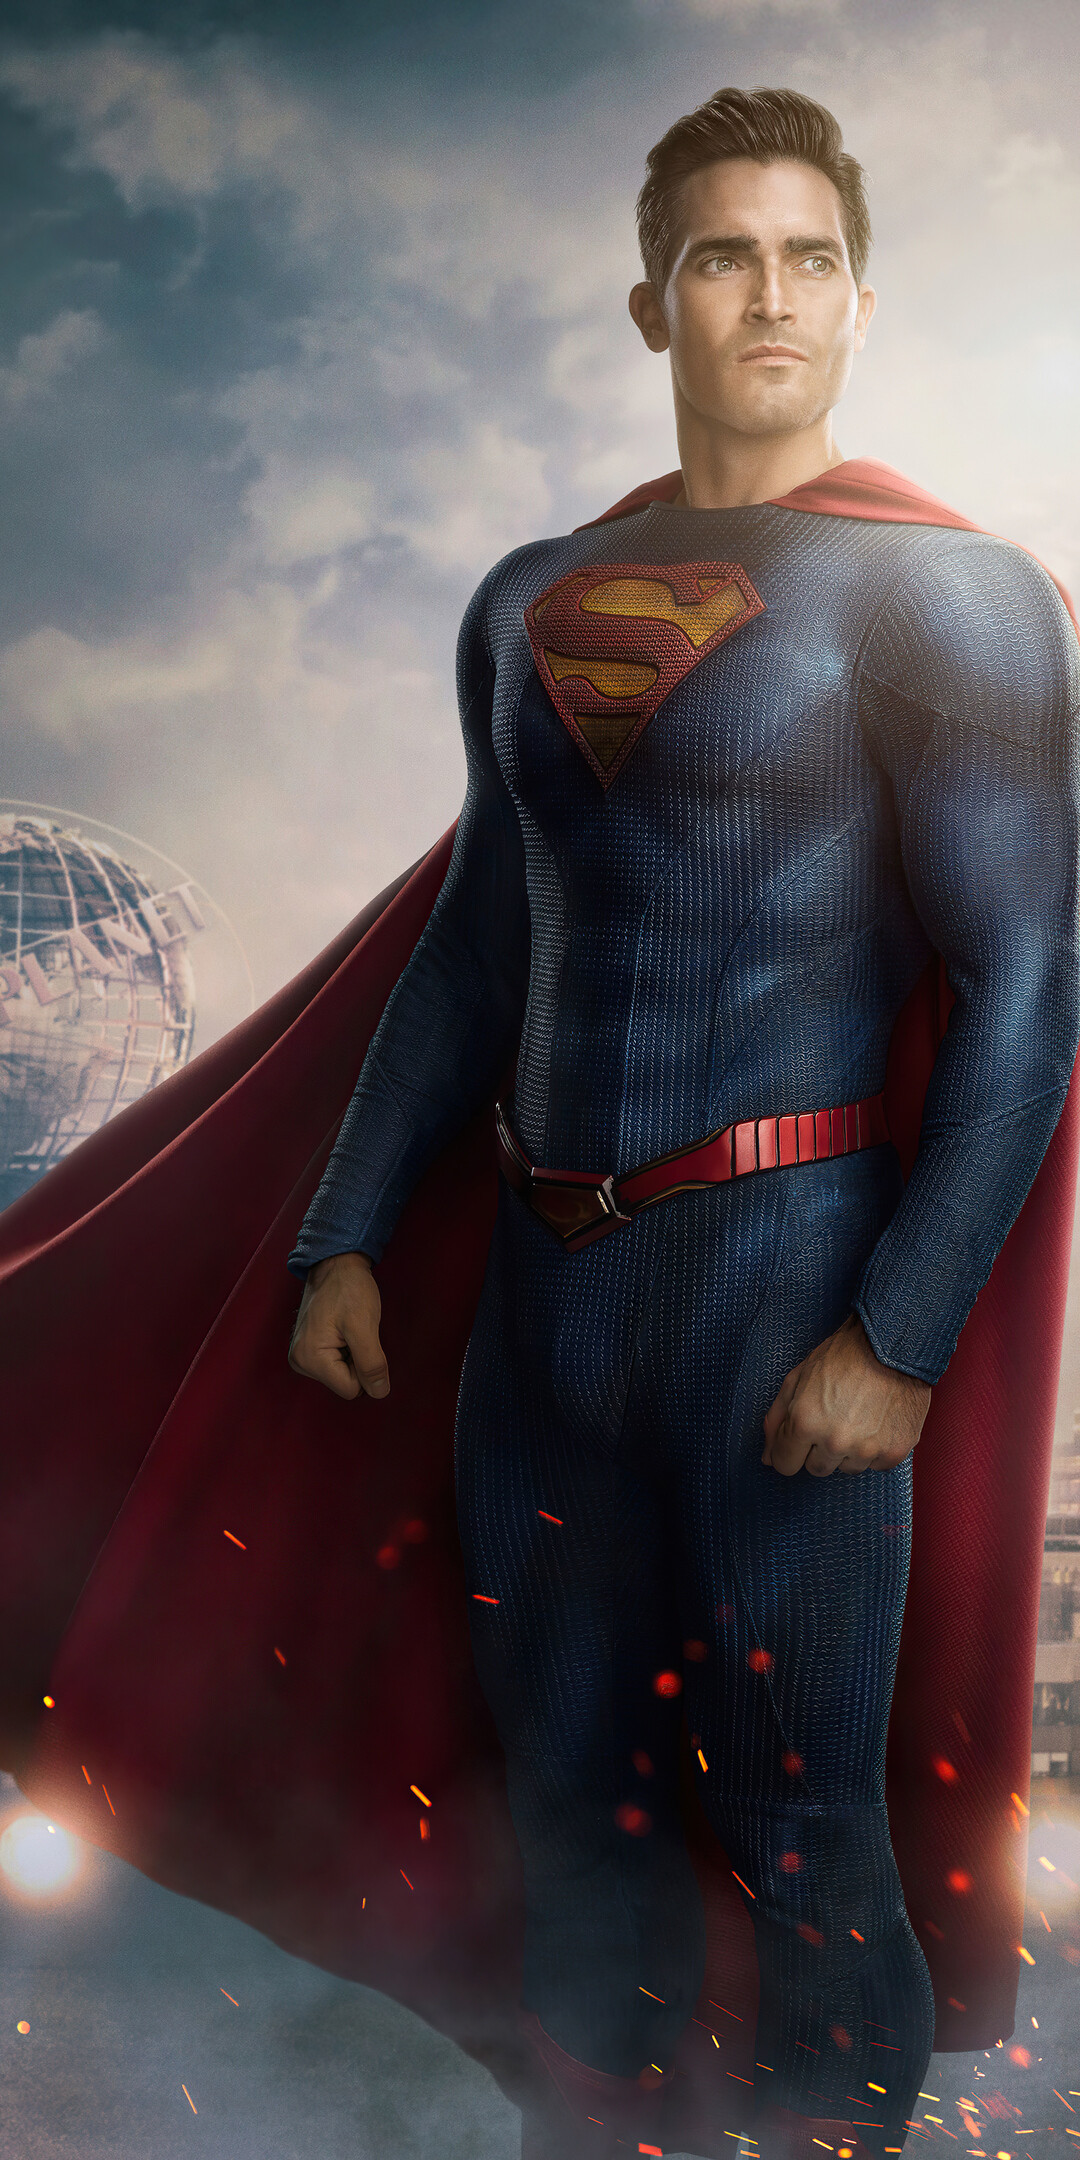 Superman and Lois (TV Series): Clark Kent, also known by his birth name Kal-El, Tyler Hoechlin. 1080x2160 HD Wallpaper.